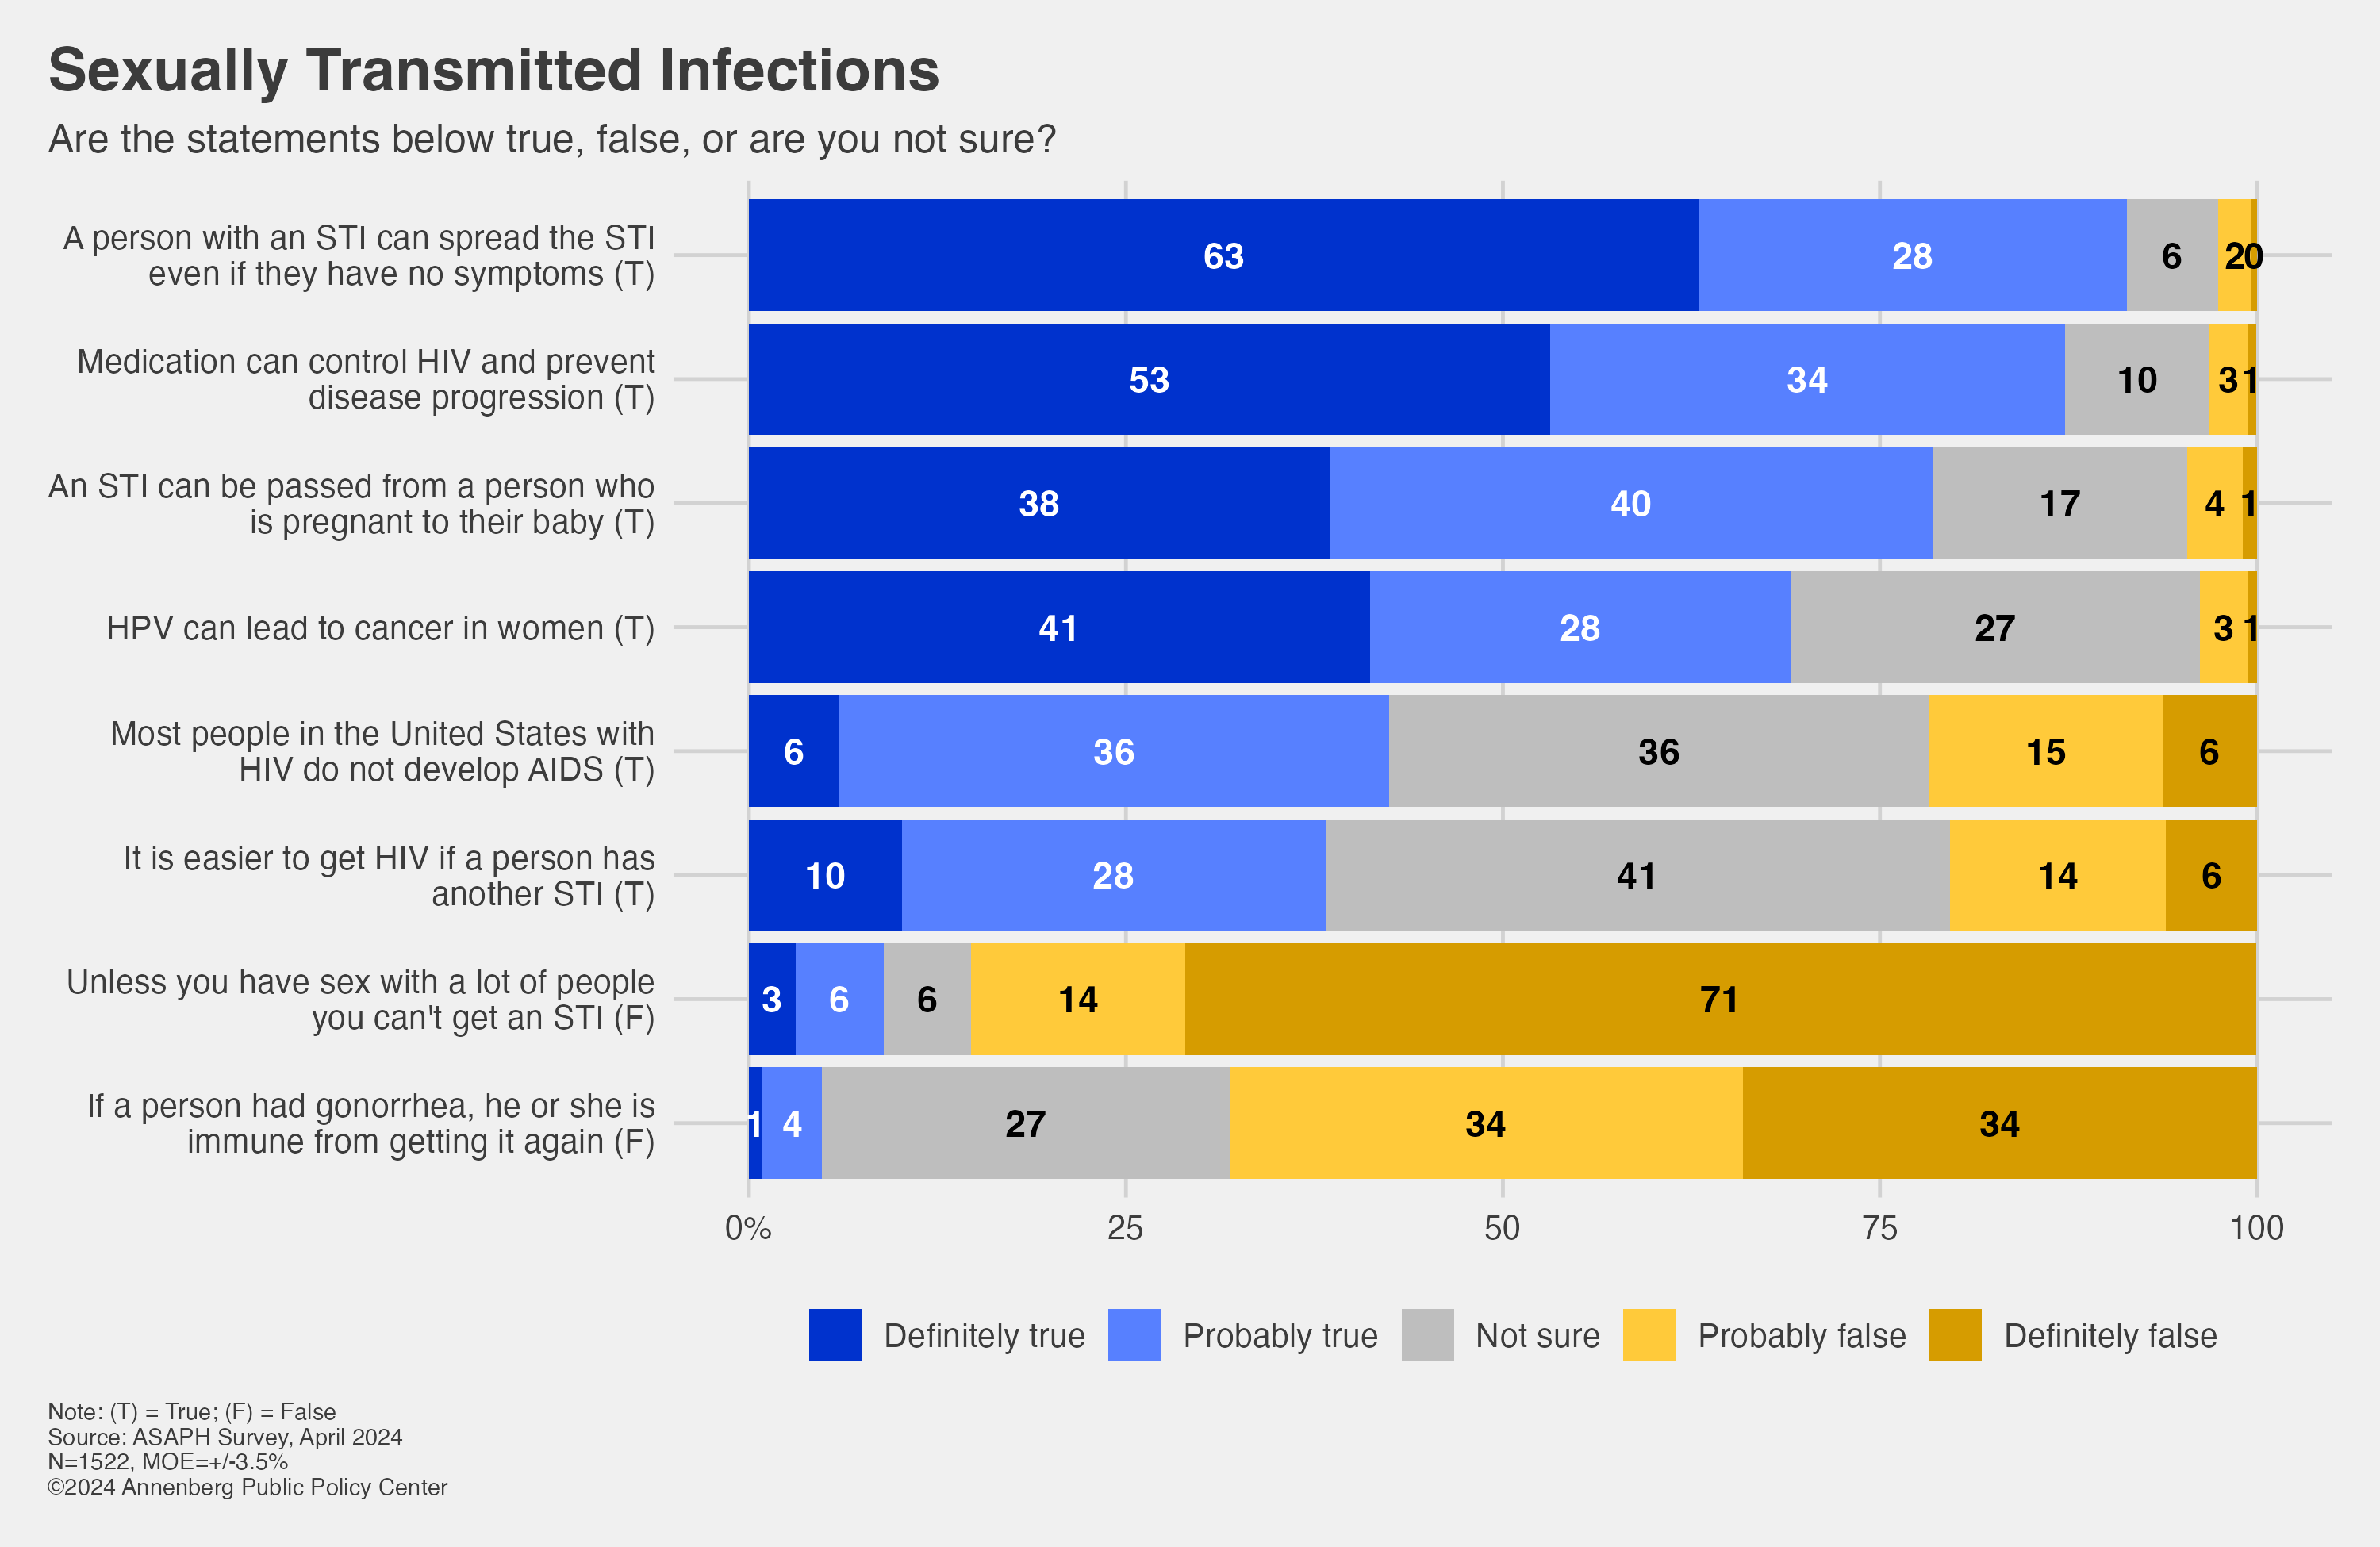 Bar chart showing respondents' knowledge of sexually transmitted infections.